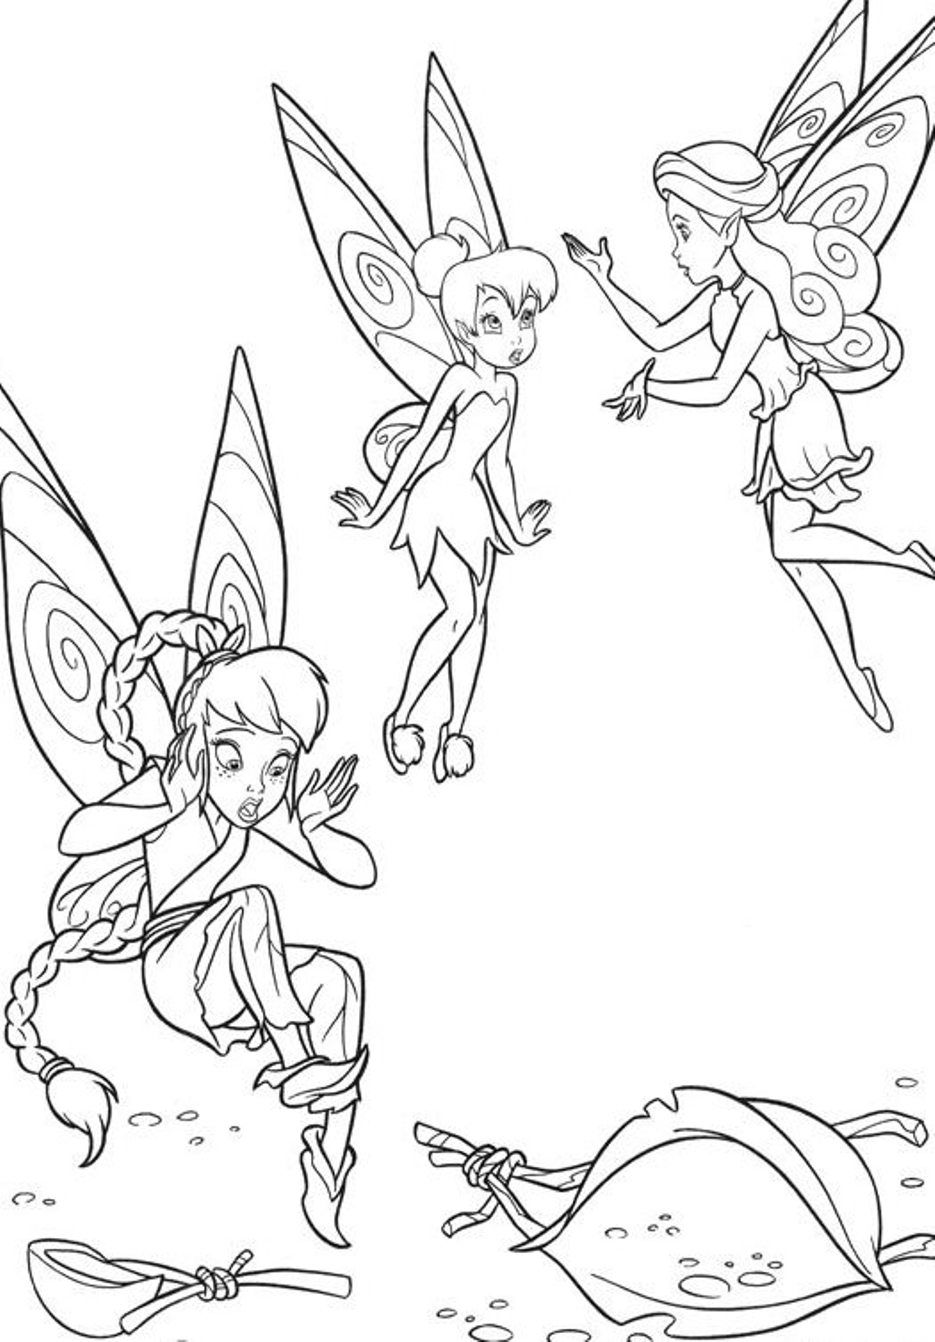 Tinkerbell And Friends Coloring Page - Coloring Home